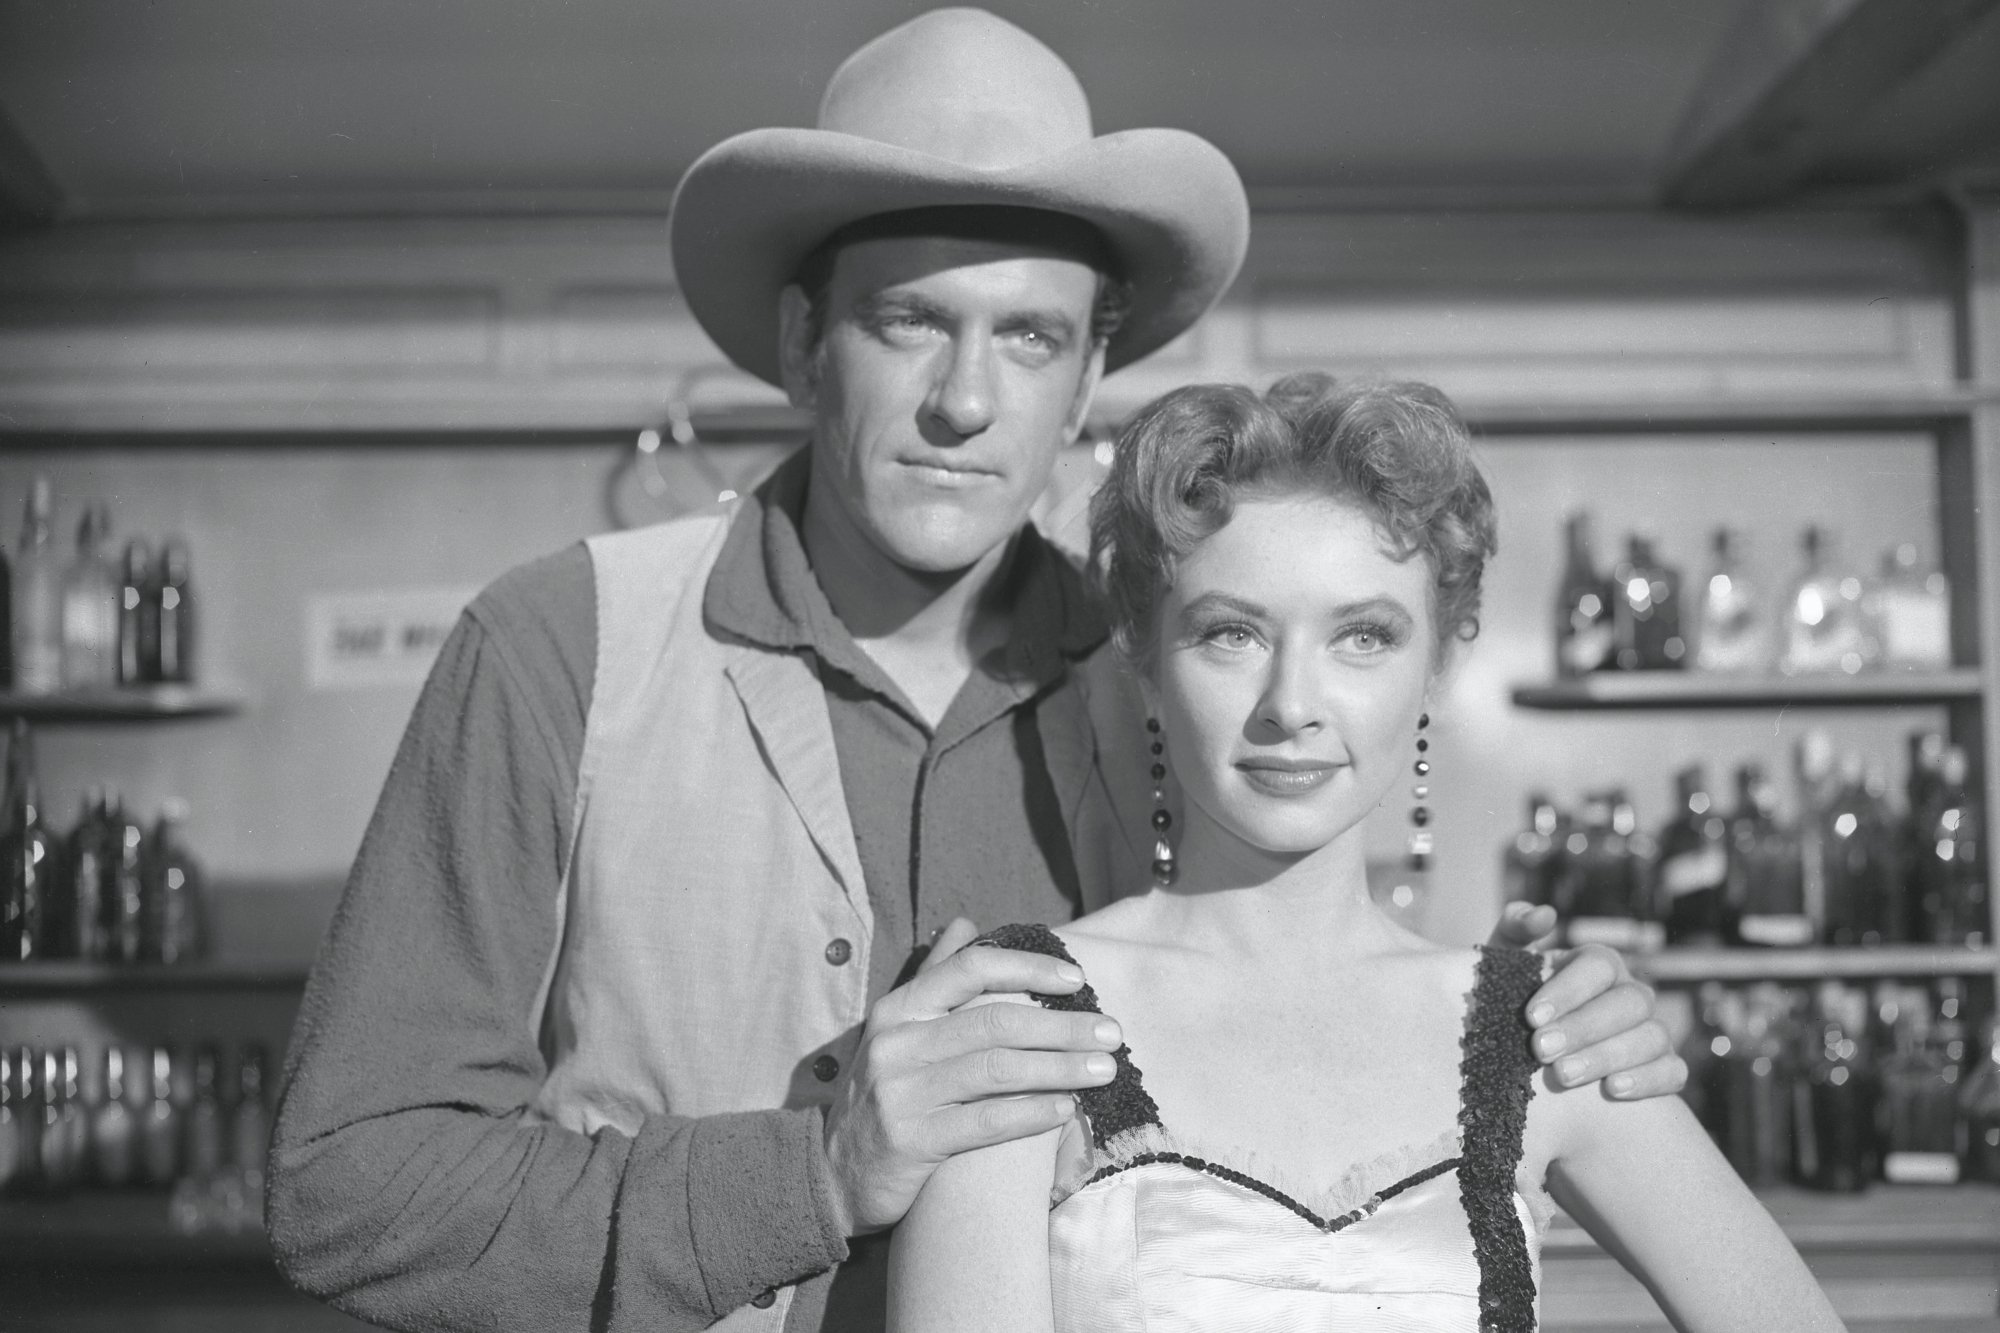 'Gunsmoke' James Arness as Marshal Matt Dillon and Amanda Blake as Kitty Russell. He's standing just behind her with his hands on her shoulders. They're both wearing Western costumes.